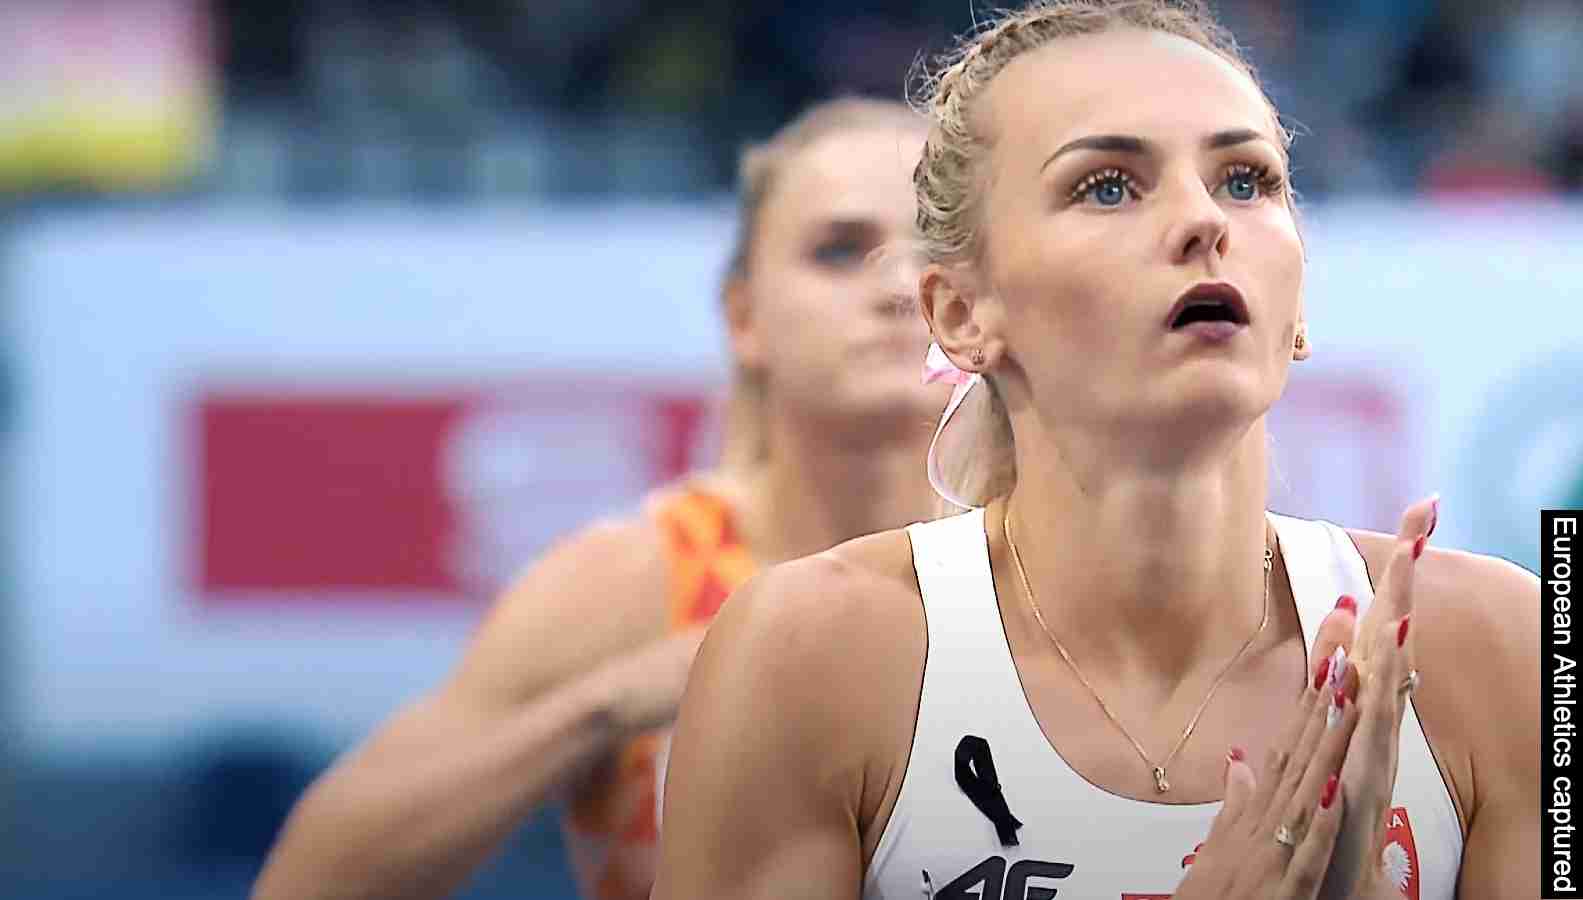 Justyna-Swiety-Ersetic-of-Poland-in-the-400m